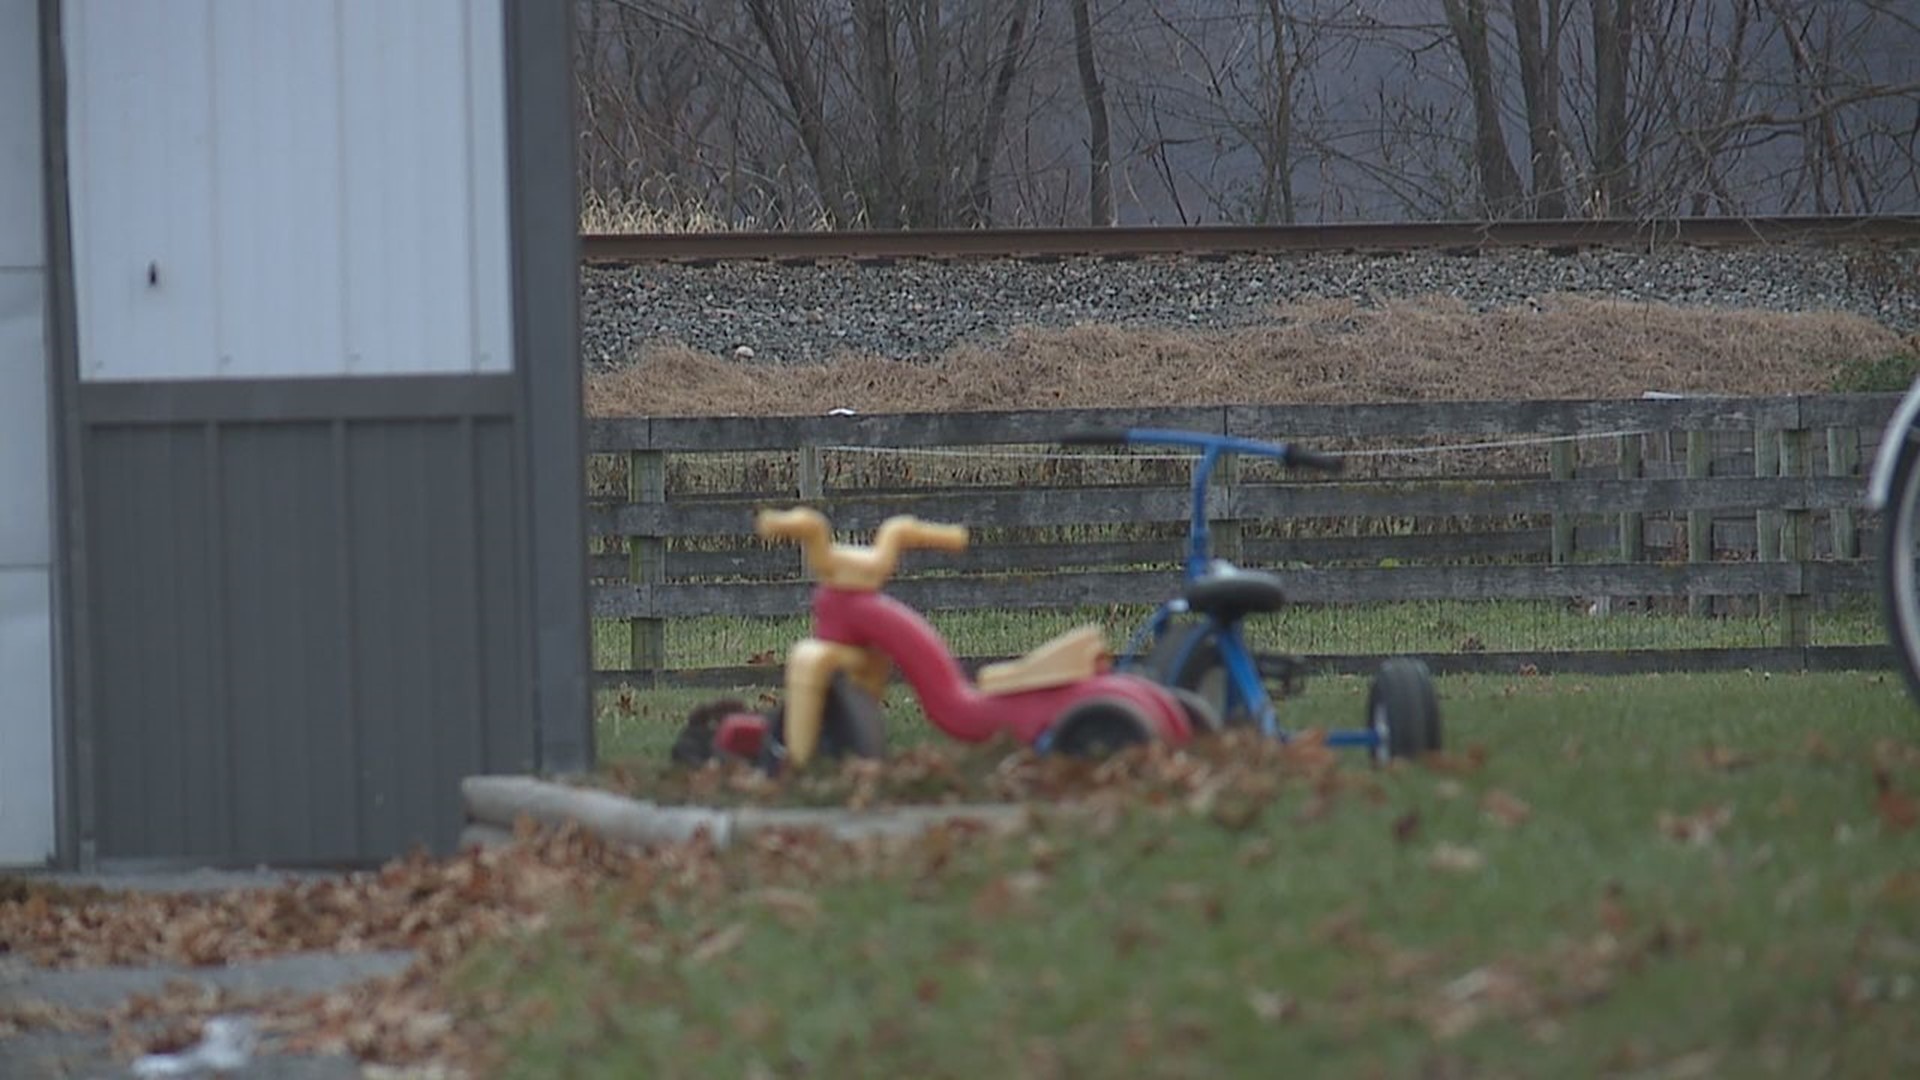 Residents of the quiet community of South Newton Township, Cumberland County were shocked by the loss.